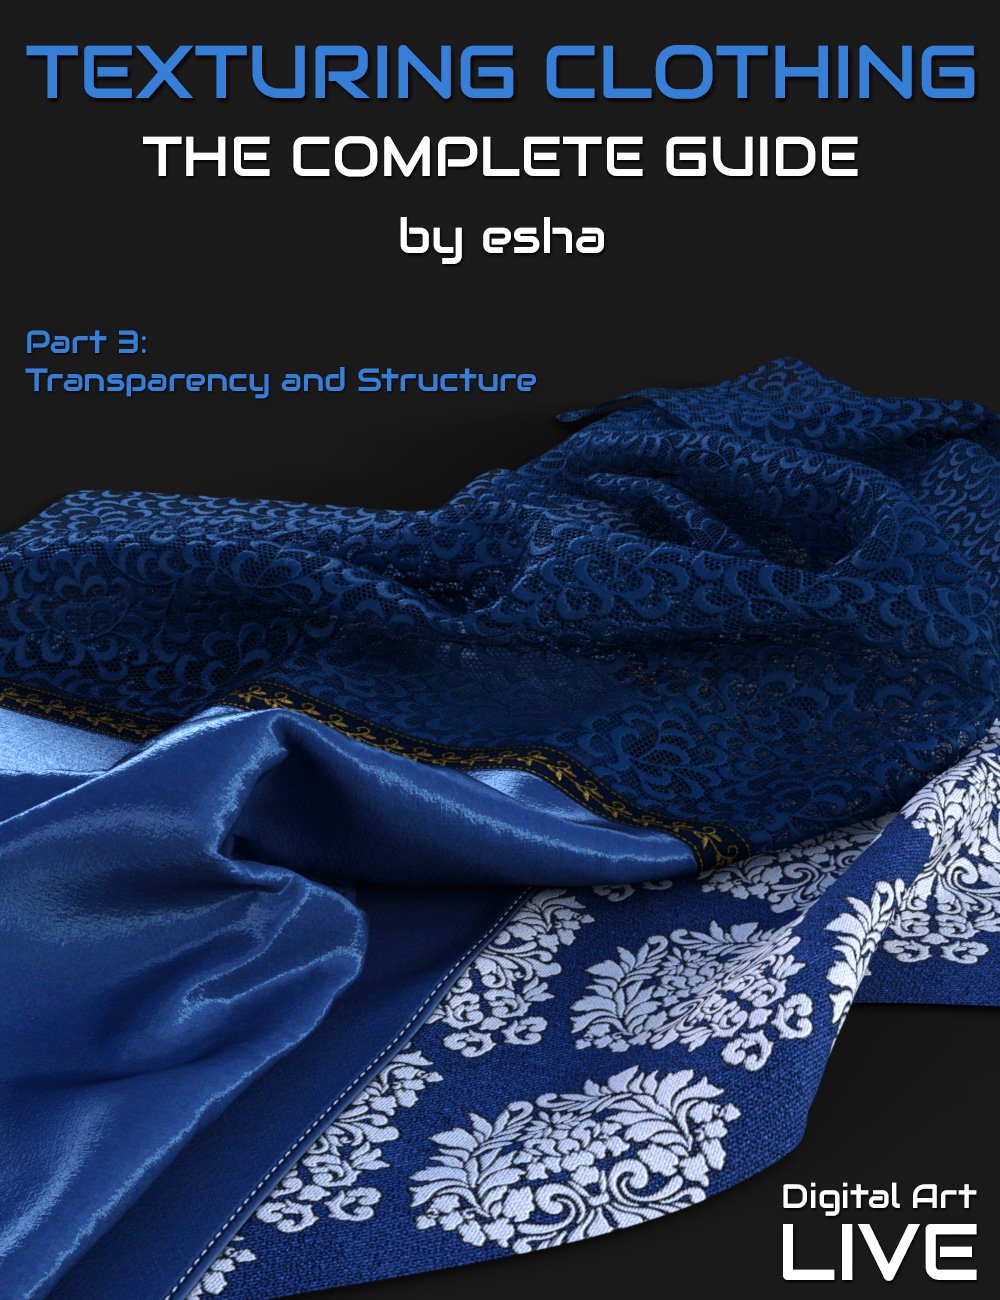 The Complete Guide to Texturing Clothing - Part 3 by: eshaCganDigital Art Live, 3D Models by Daz 3D